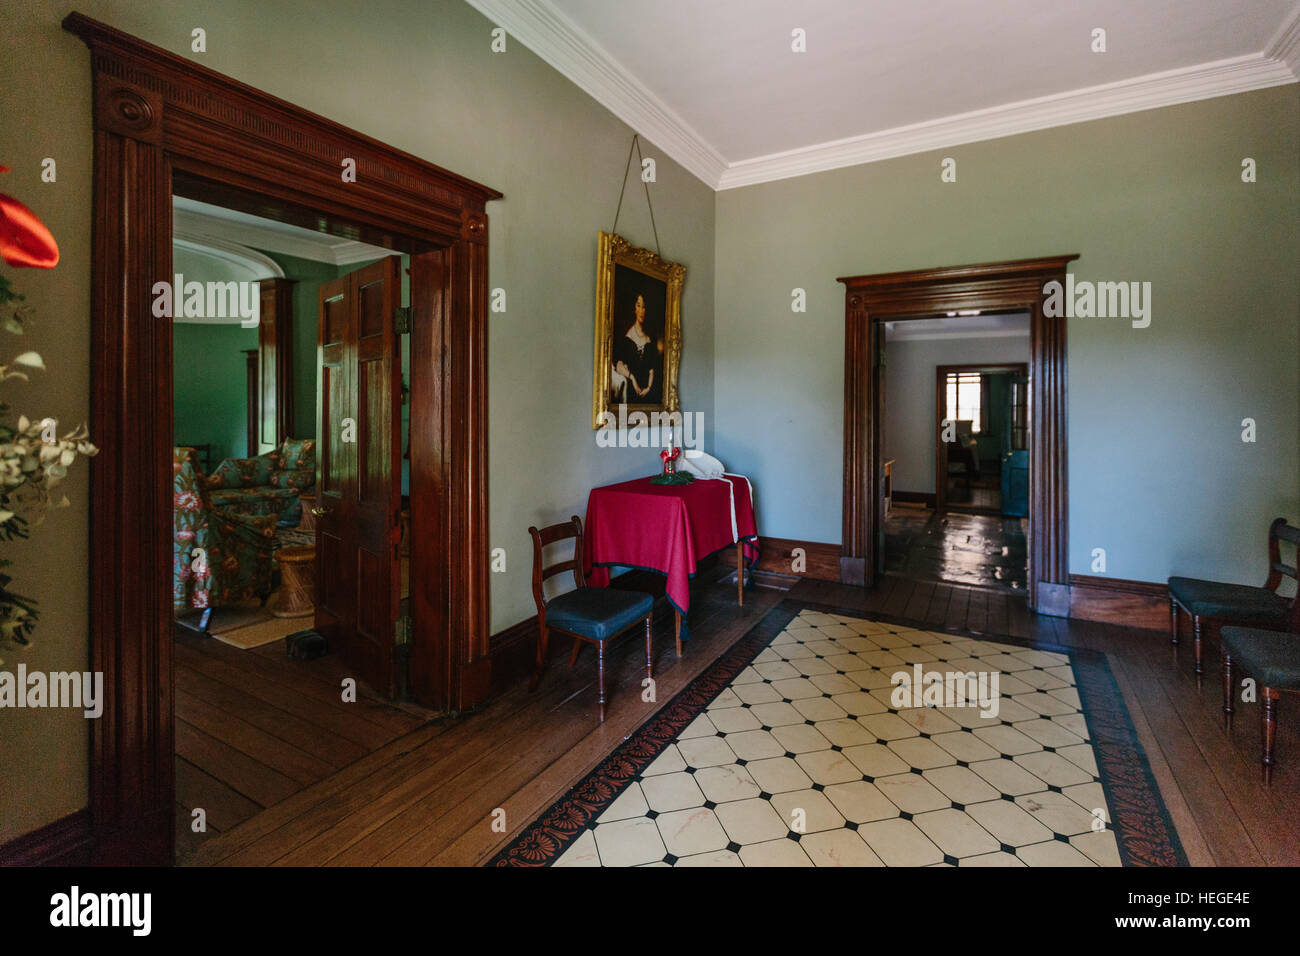 The entrance hall interior of Elizabeth Farm, an historical homestead and museum in Sydney, Australia Stock Photo